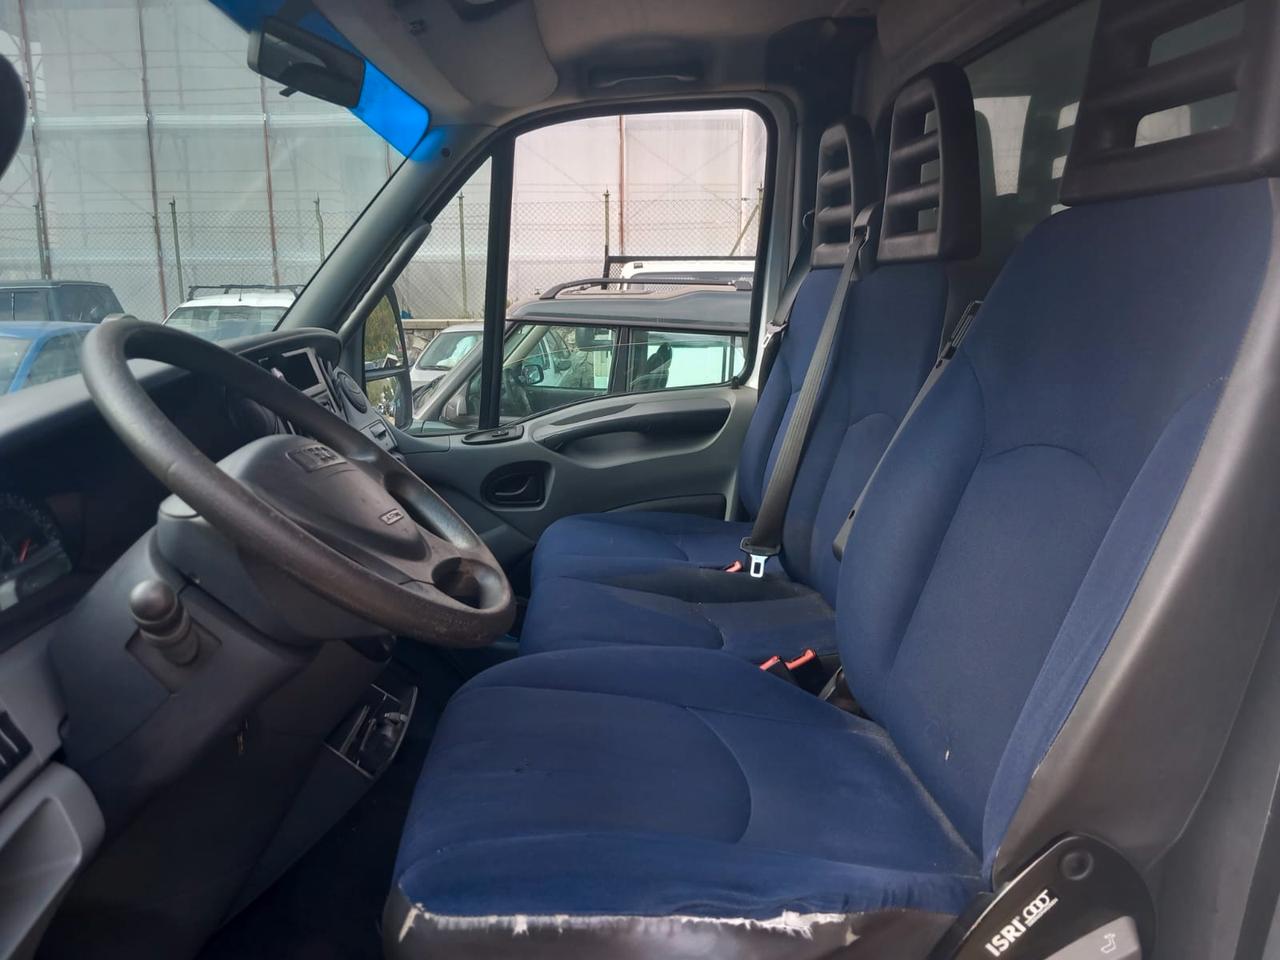 Iveco Daily IVECO DAILY 3.0 Patente C